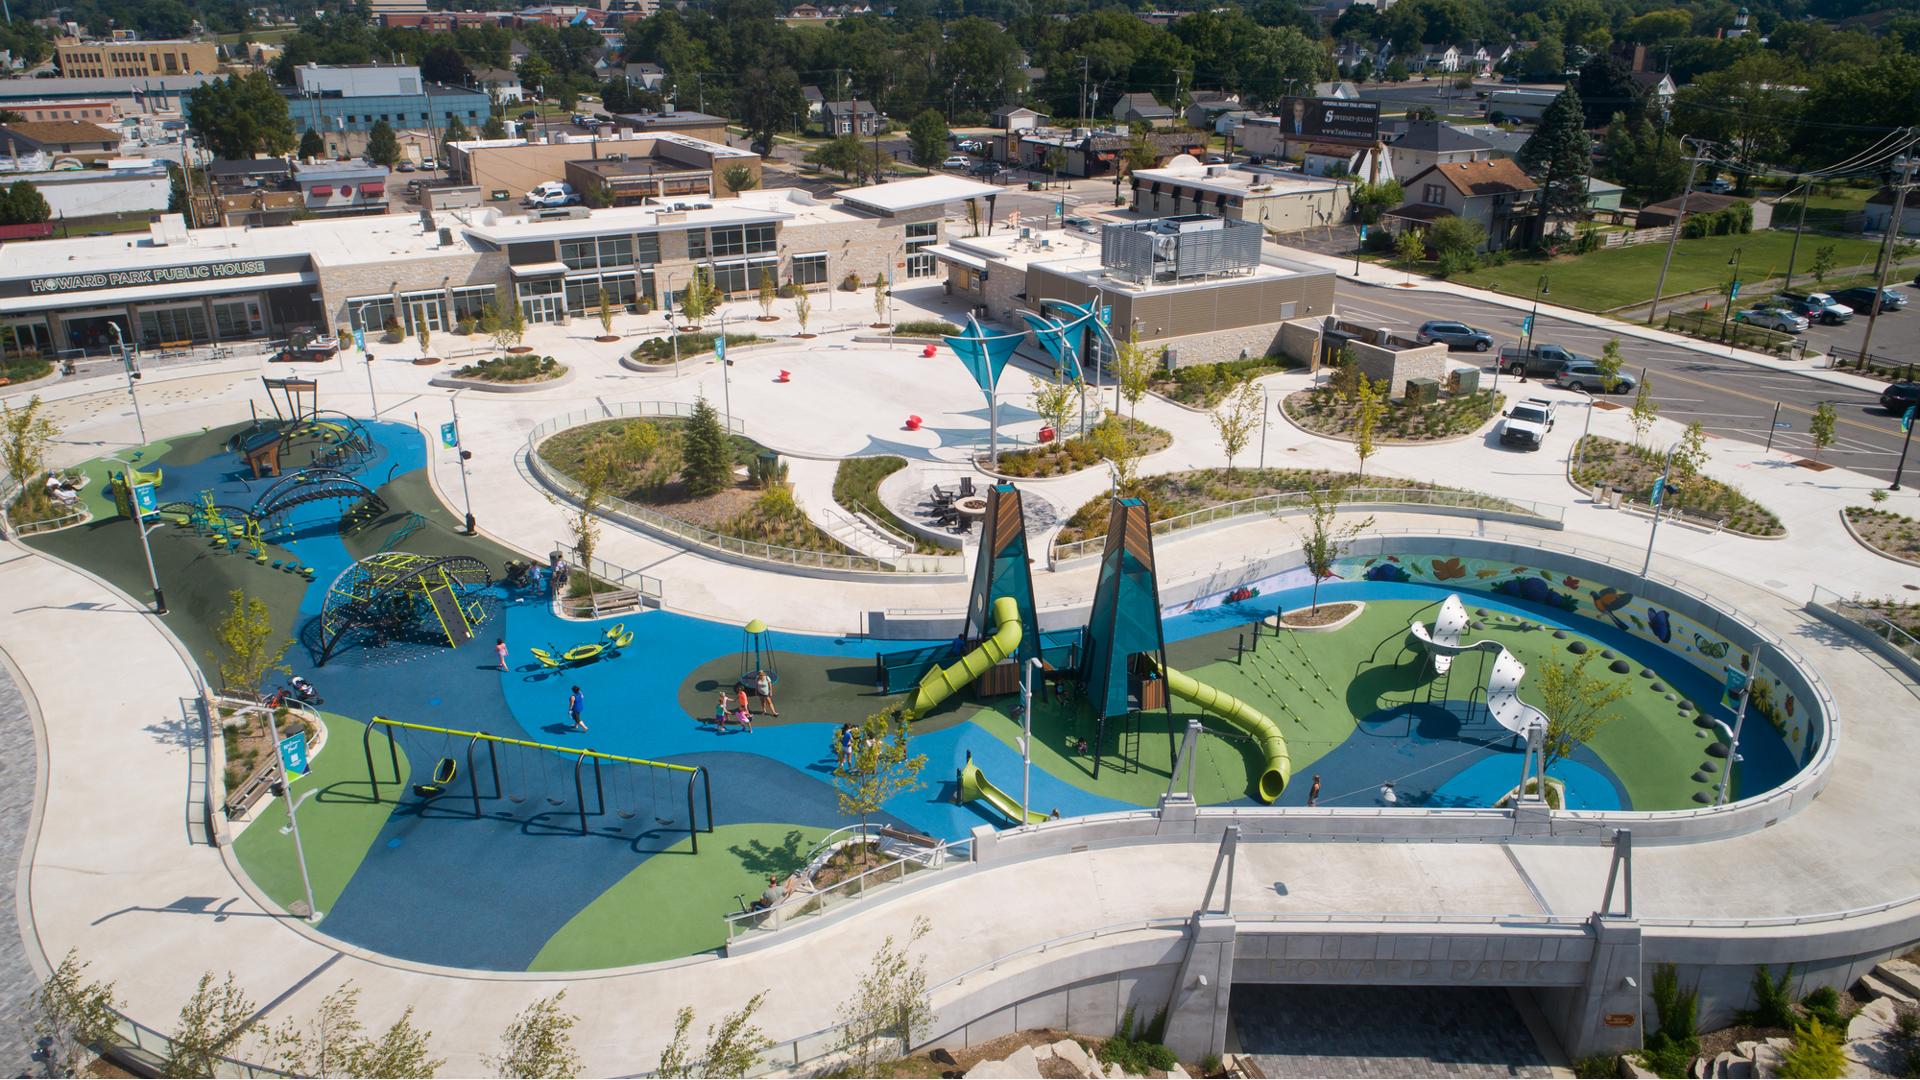 Full elevated view of a large play area with two main modern design tower structures. Other modern curved climbers and play structures are scatter throughout the play area all on safety surfacing colored in different shades of blues and greens.